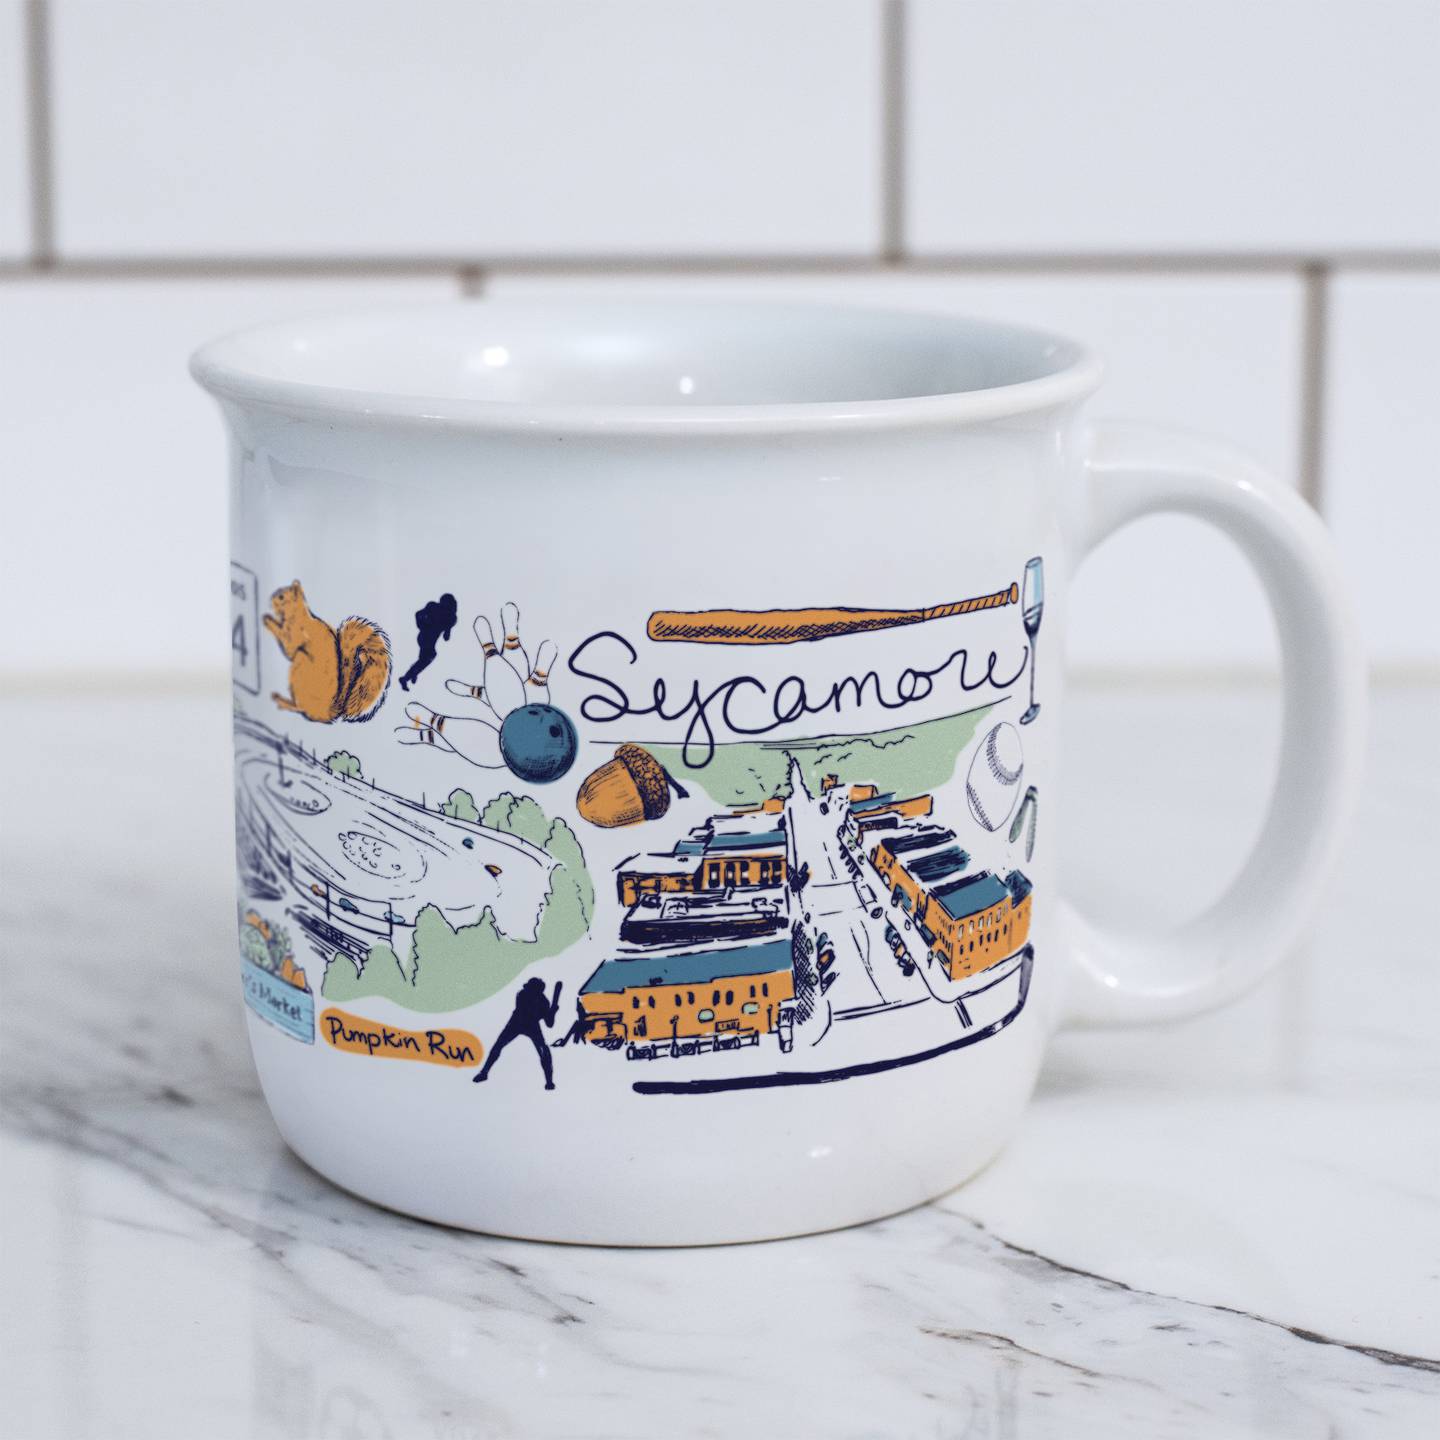 Ashley Ann Klockenga first designed mugs for First Nation communities in Canada before bringing her venture back to the northern Illinois community where she first started her family.